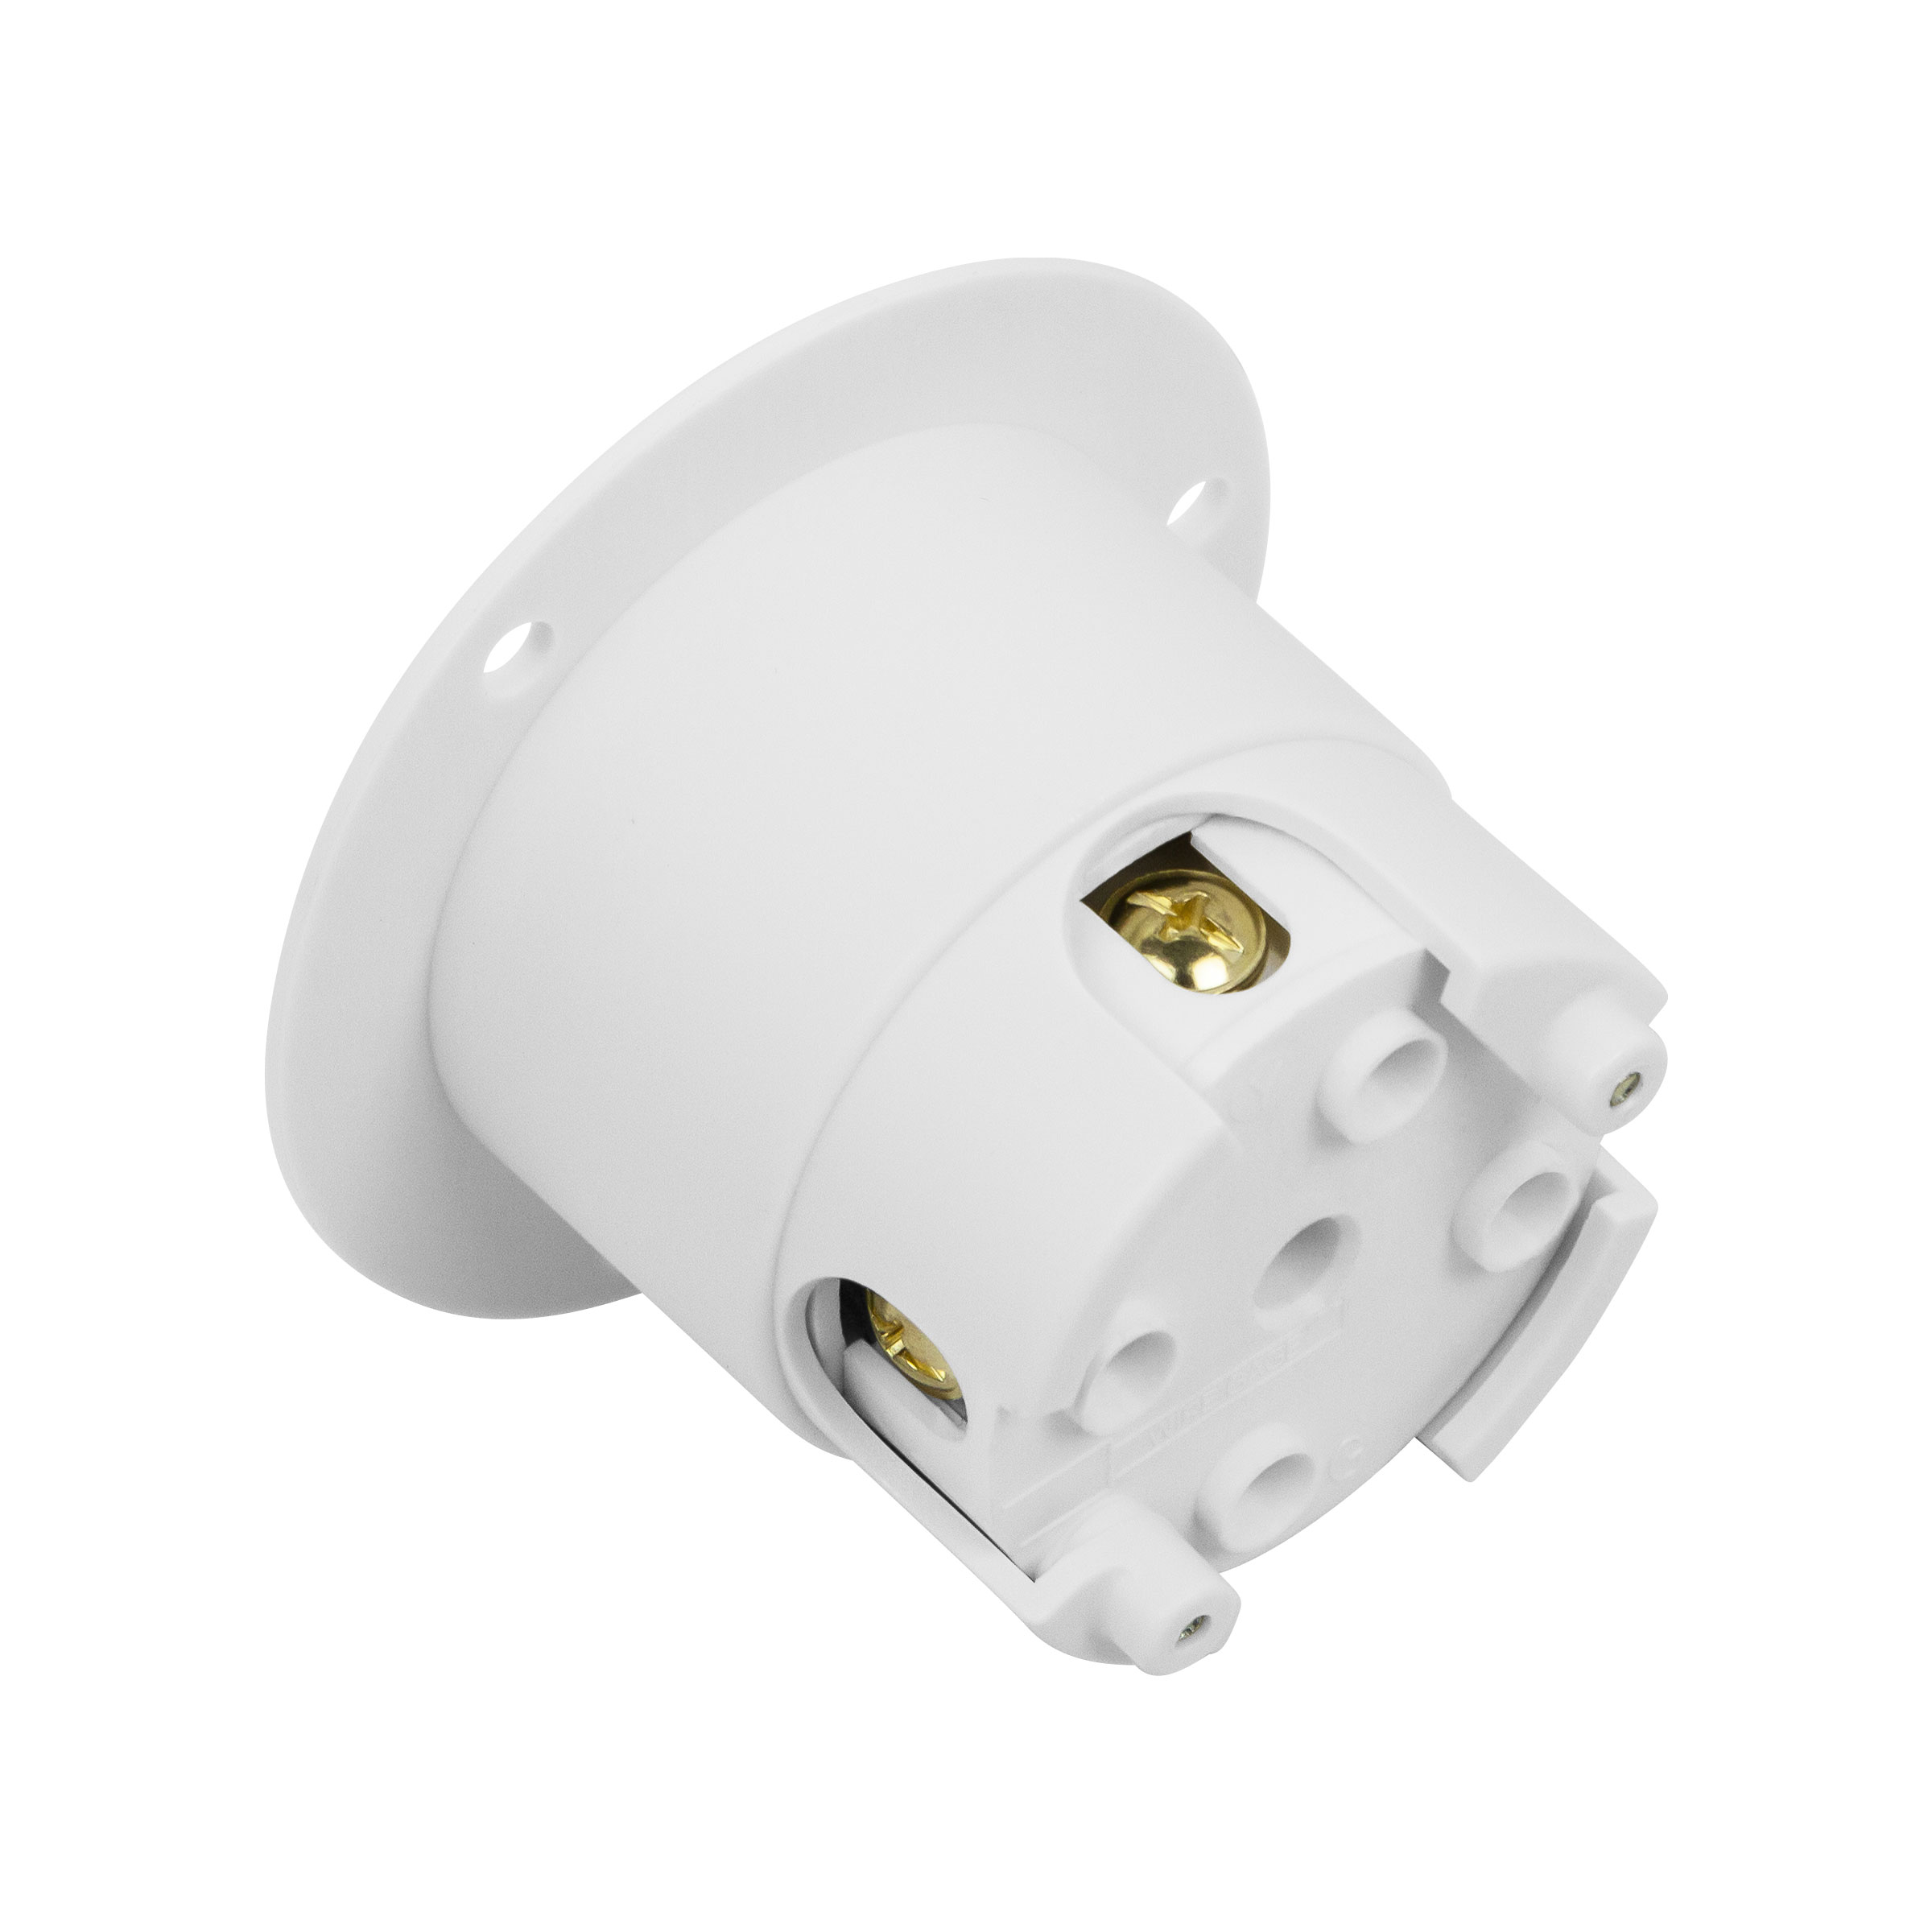 NEMA L15-20 Flanged Outlet Locking Plug Charger Receptacle 20 Amp White